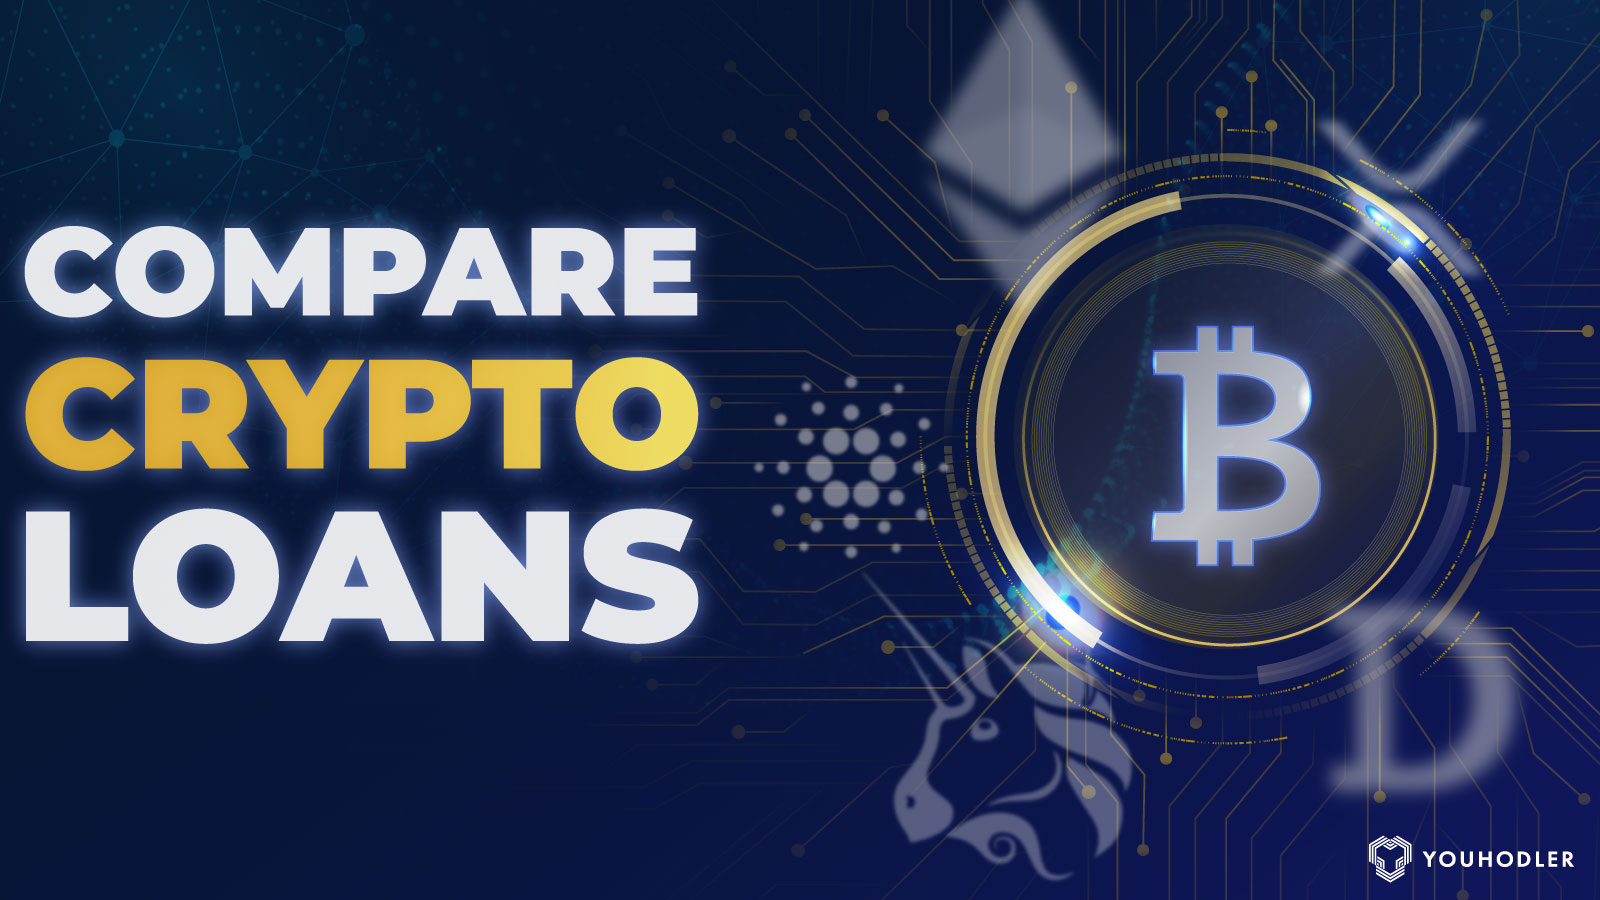 Secure loans with low collateral requirements in the crypto industry